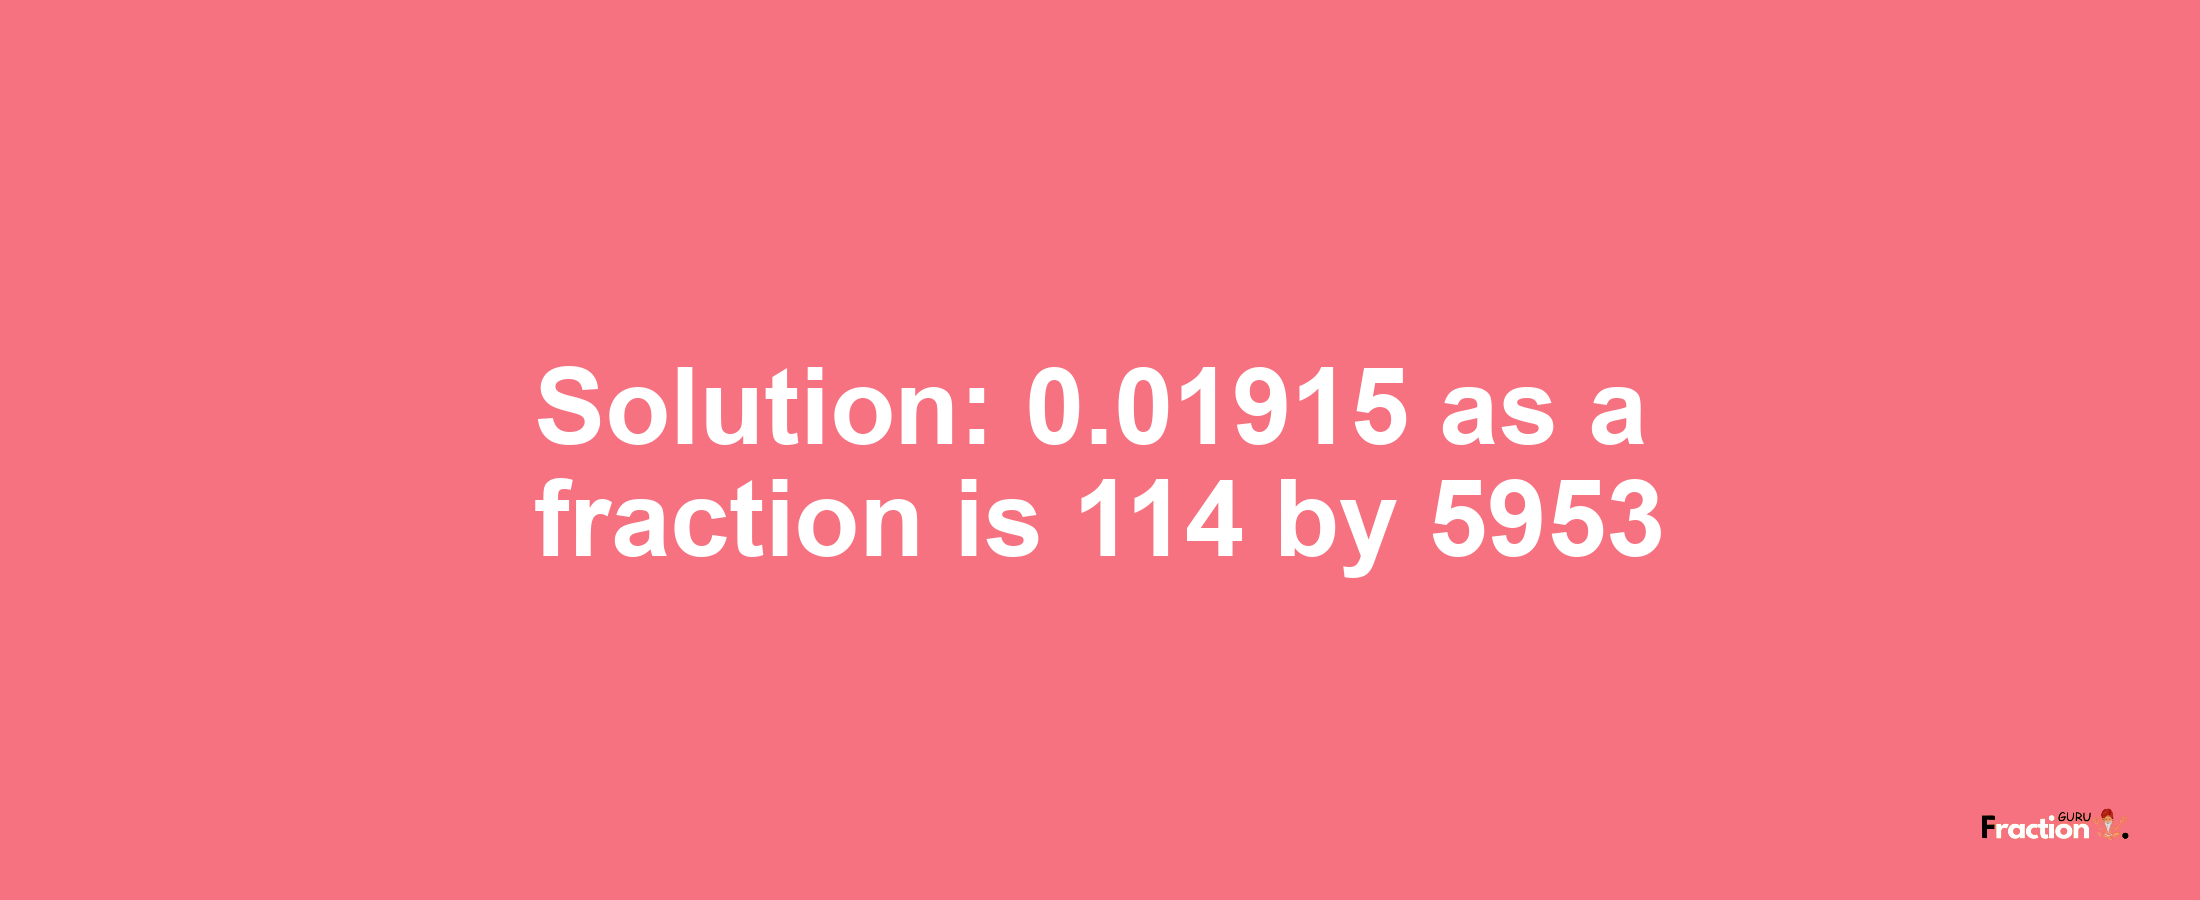 Solution:0.01915 as a fraction is 114/5953